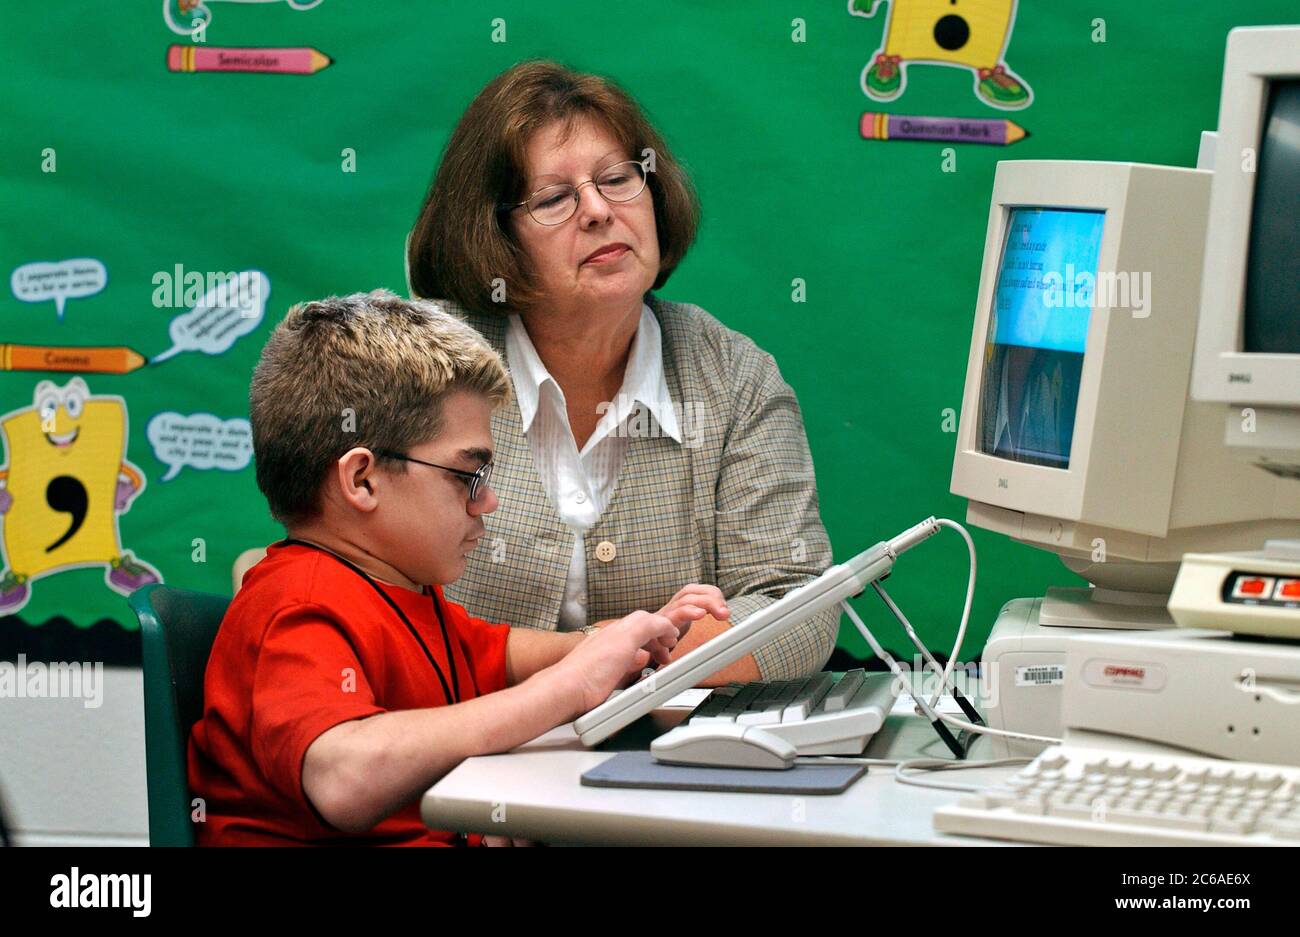 Mabank, Texas September 10, 2003: 12-year-old boy with Hurler's Syndrome with a full-time teacher's aide uses Intellikeys augmentative keyboard to type more easily on a computer in his 7th grade classroom. MODEL RELEASE SP-73 (boy student in red) SP-69 (aide)  ©Bob Daemmrich Stock Photo